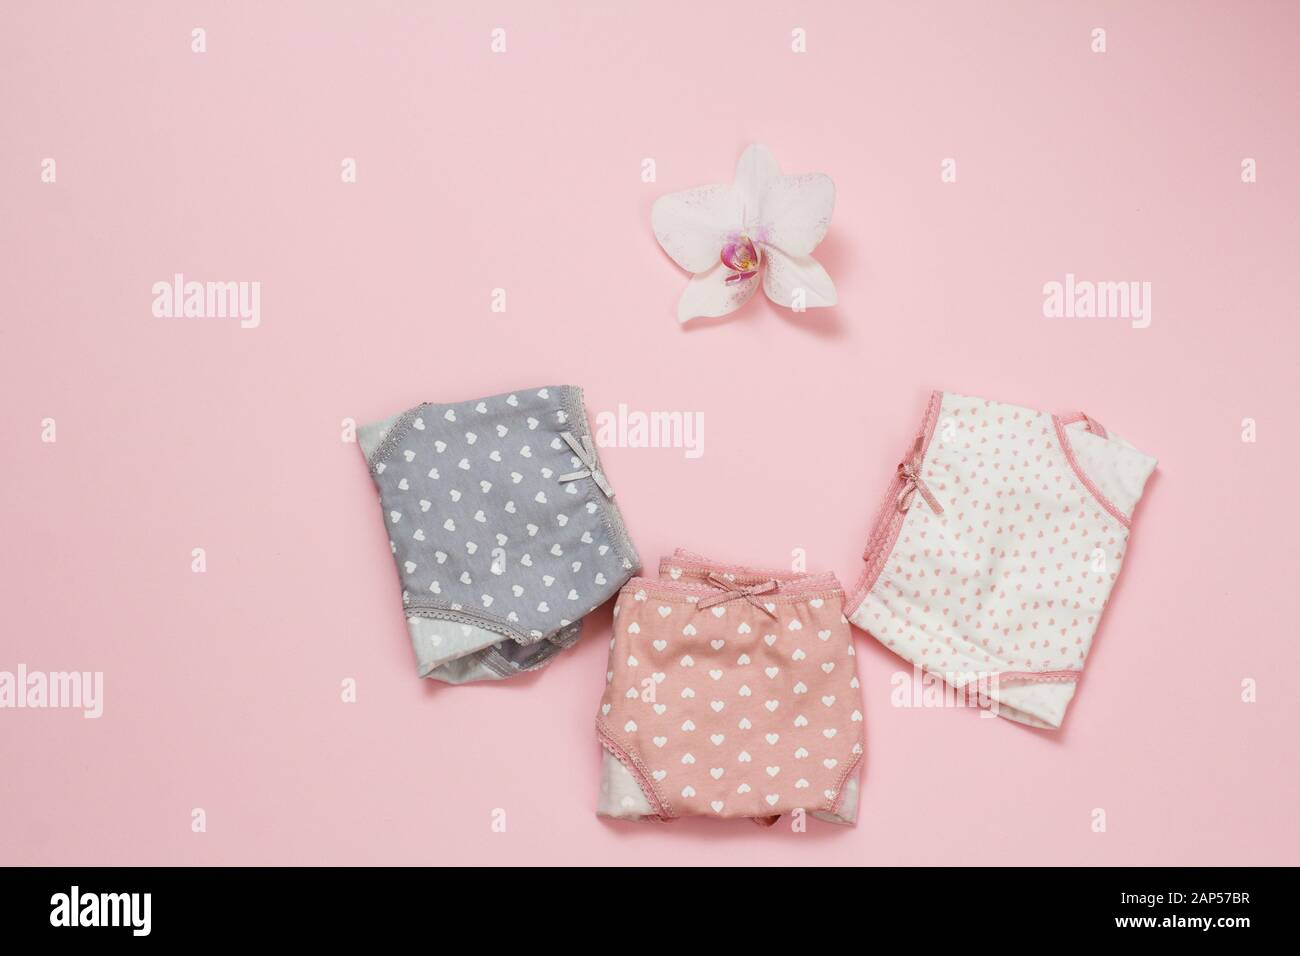 Folded cotton panties of different color with orchid bud on pink background. Woman underwear set. Top view. Stock Photo